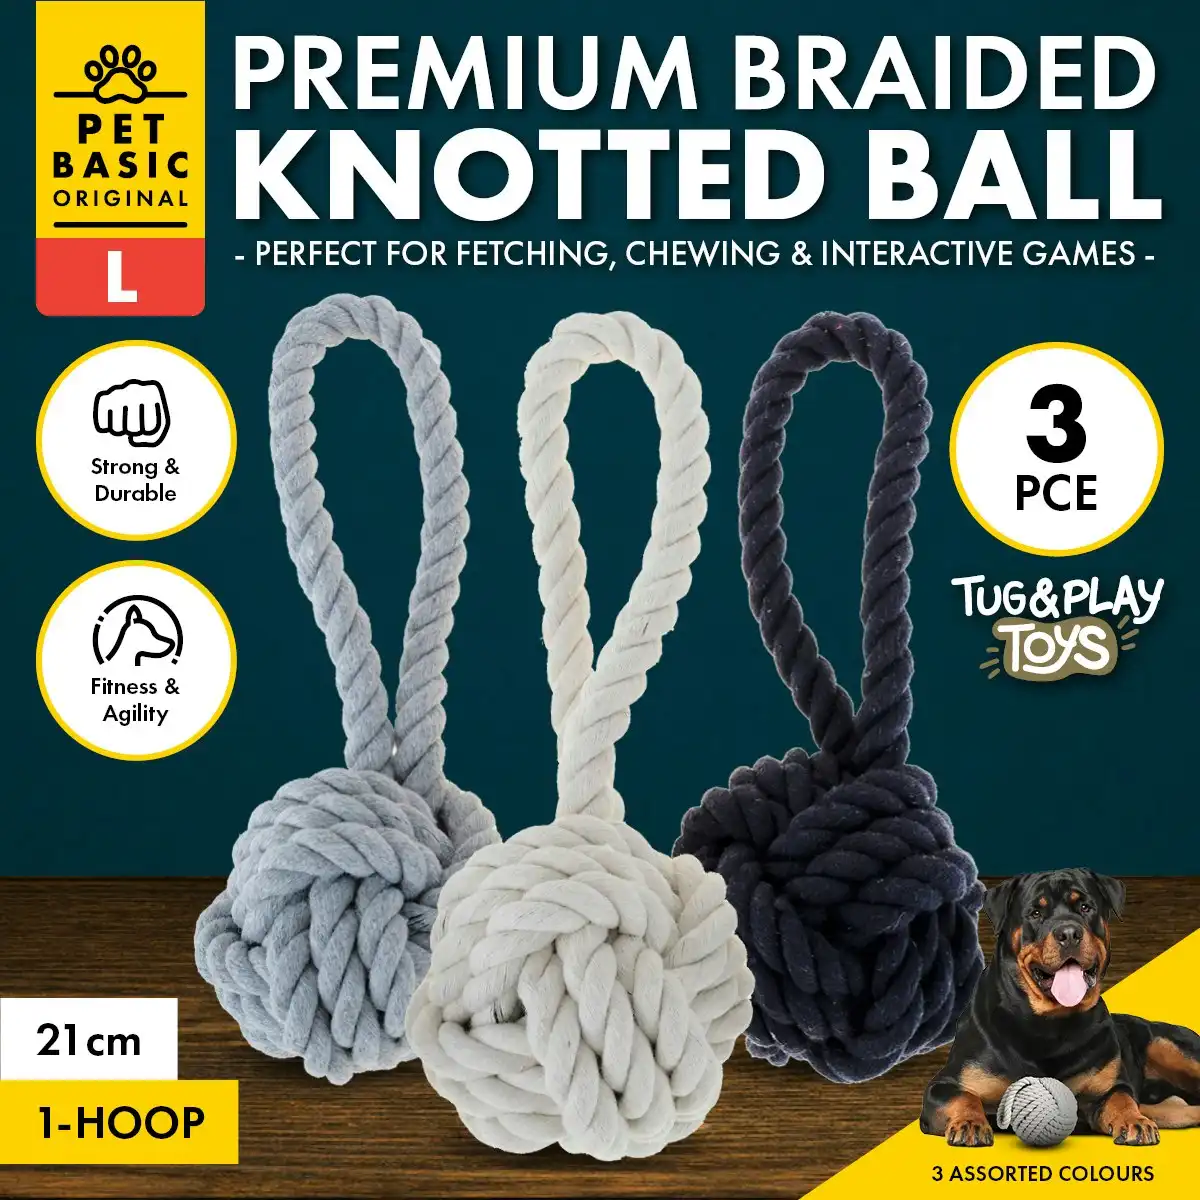 Pet Basic 3PCE Premium Braided Rope Knotted Ball Large Natural Fibres 21cm